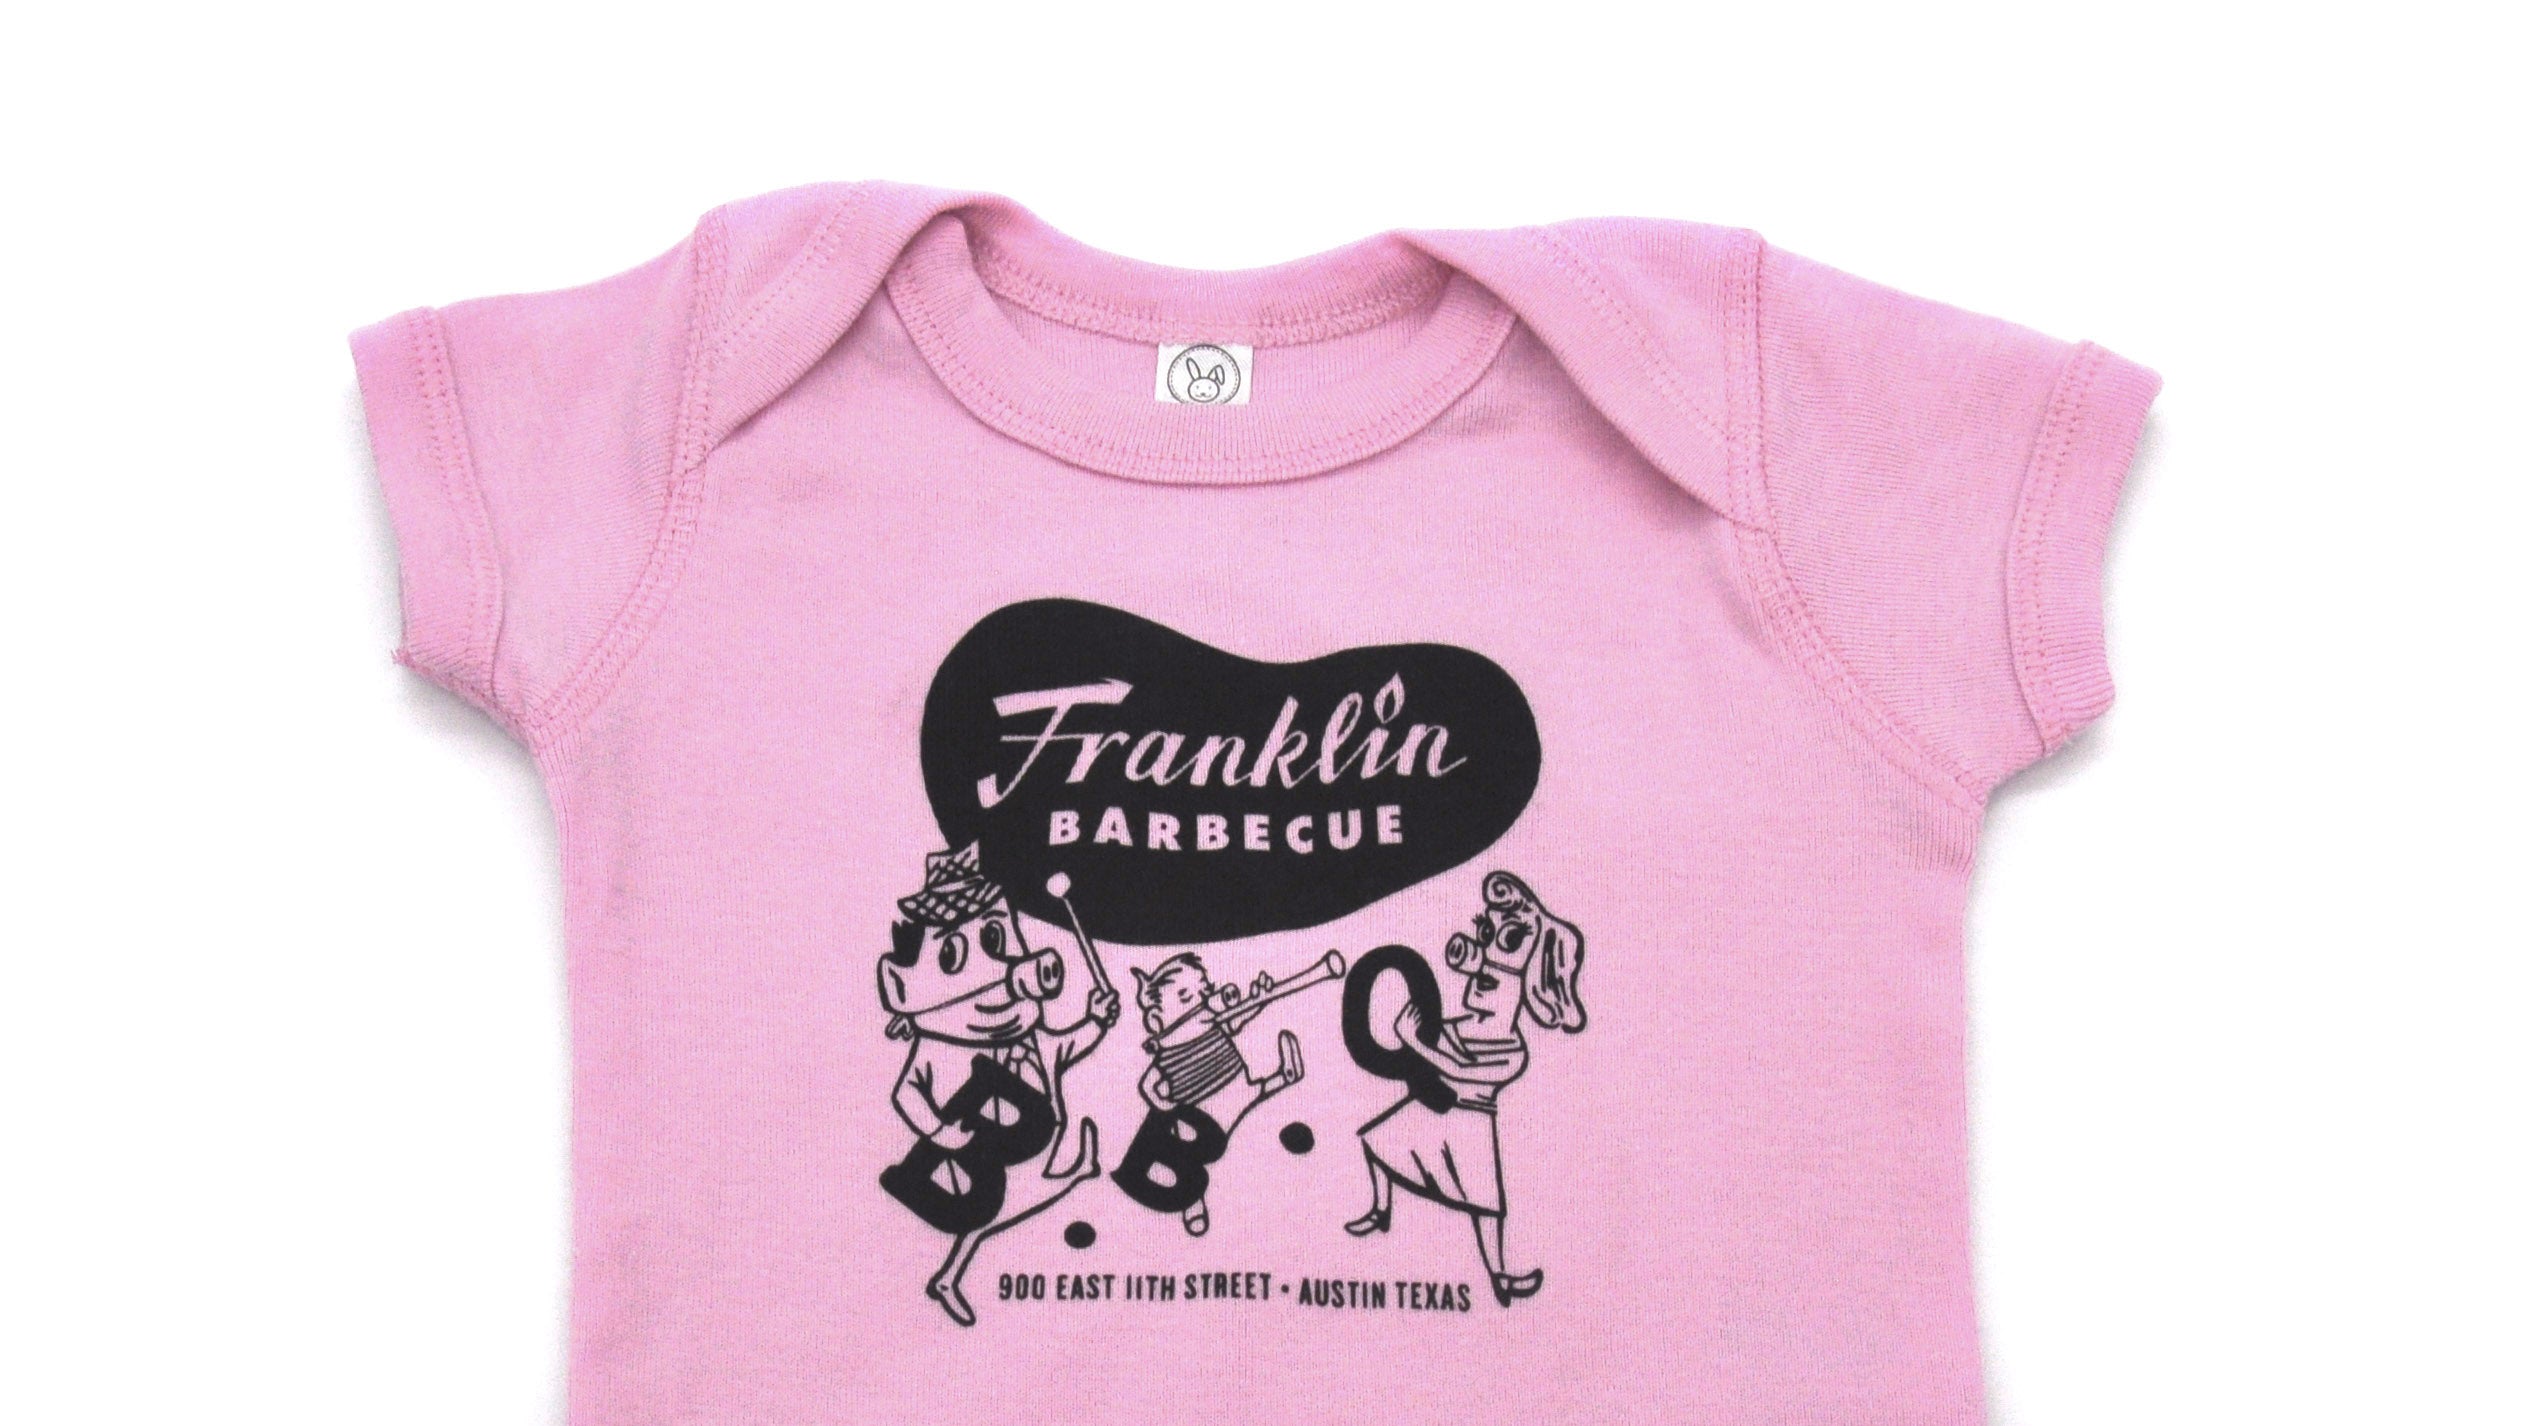 Pink onesie with Franklin Barbecue bean Logo in black and logo of dancing family holding the letters B-B-Q while wearing pig-nose masks also in black. Below the dancing family is the address of Franklin Barbecue also in black.